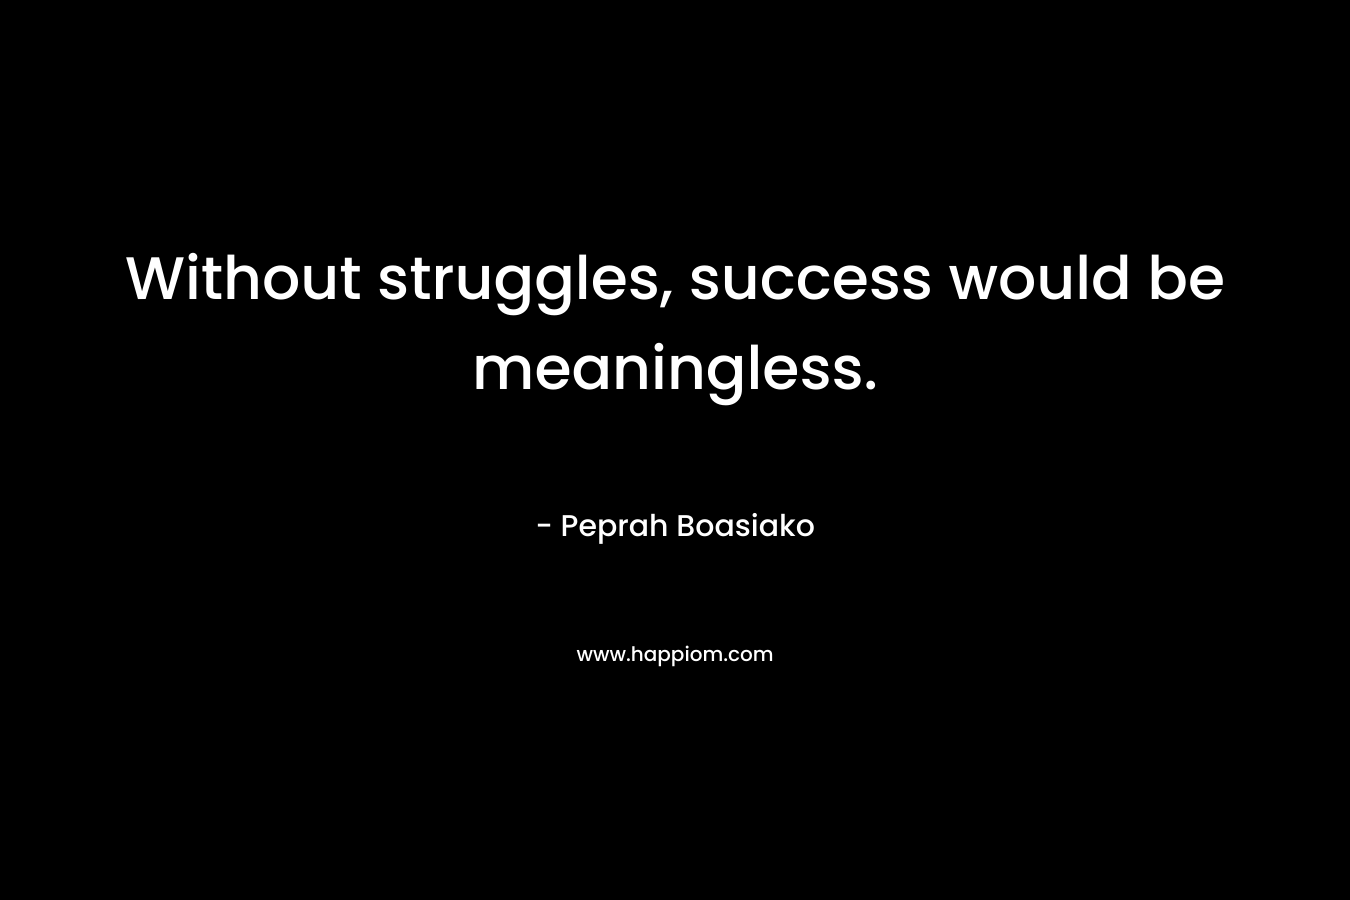 Without struggles, success would be meaningless.